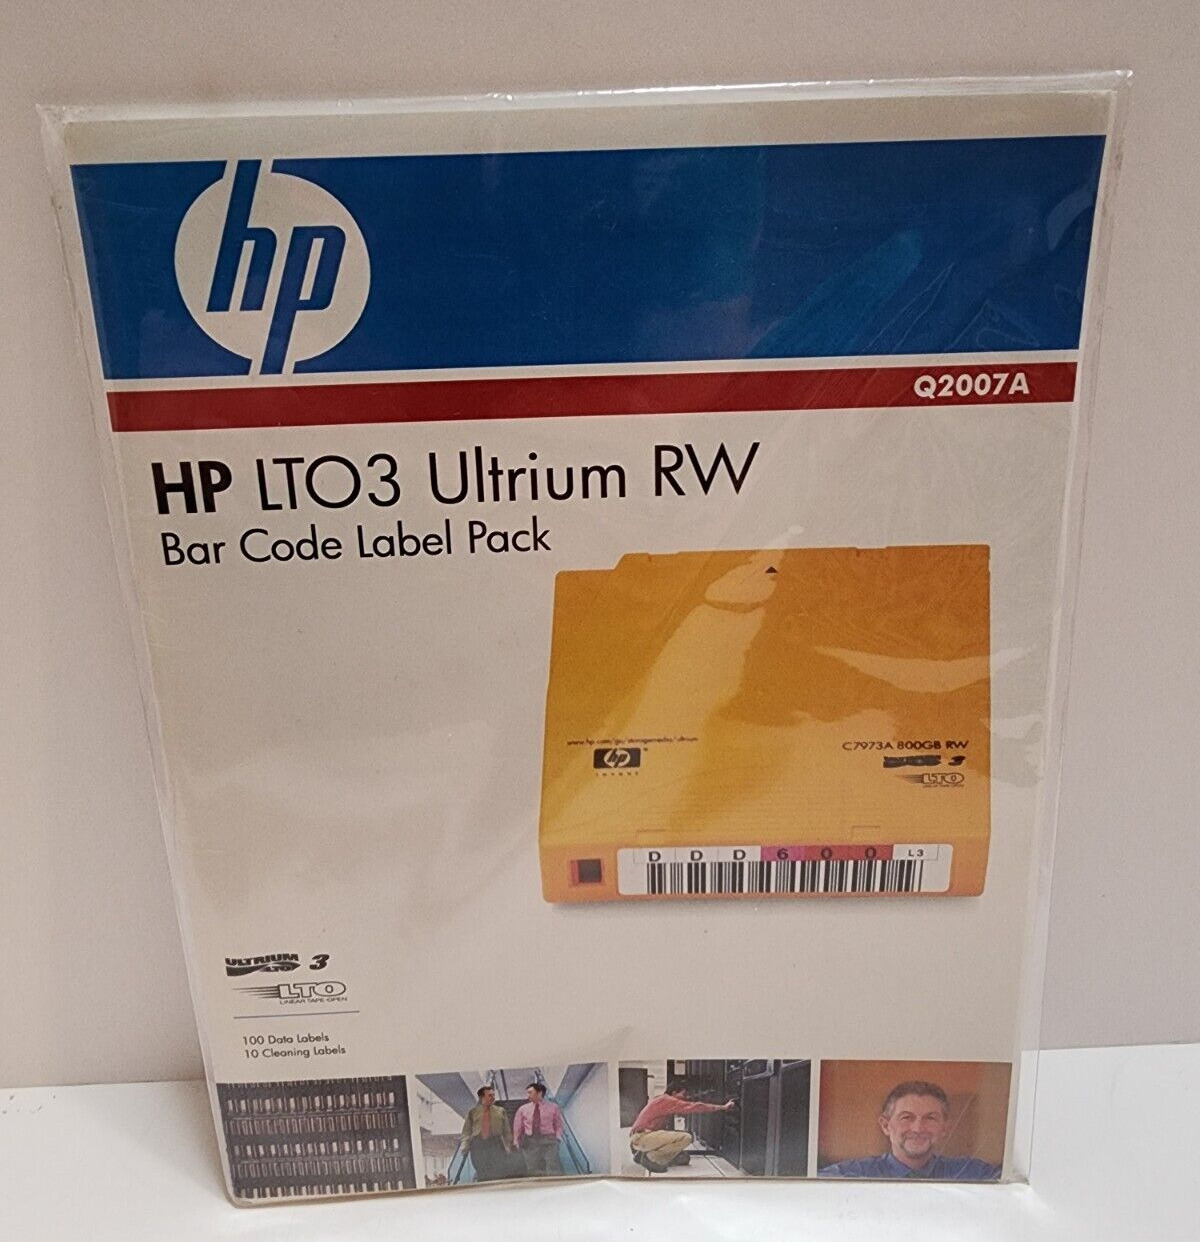 HP LTO3 Ultrium RW Bar Code Label Pack Q2007A Data Cleaning Labels New Sealed